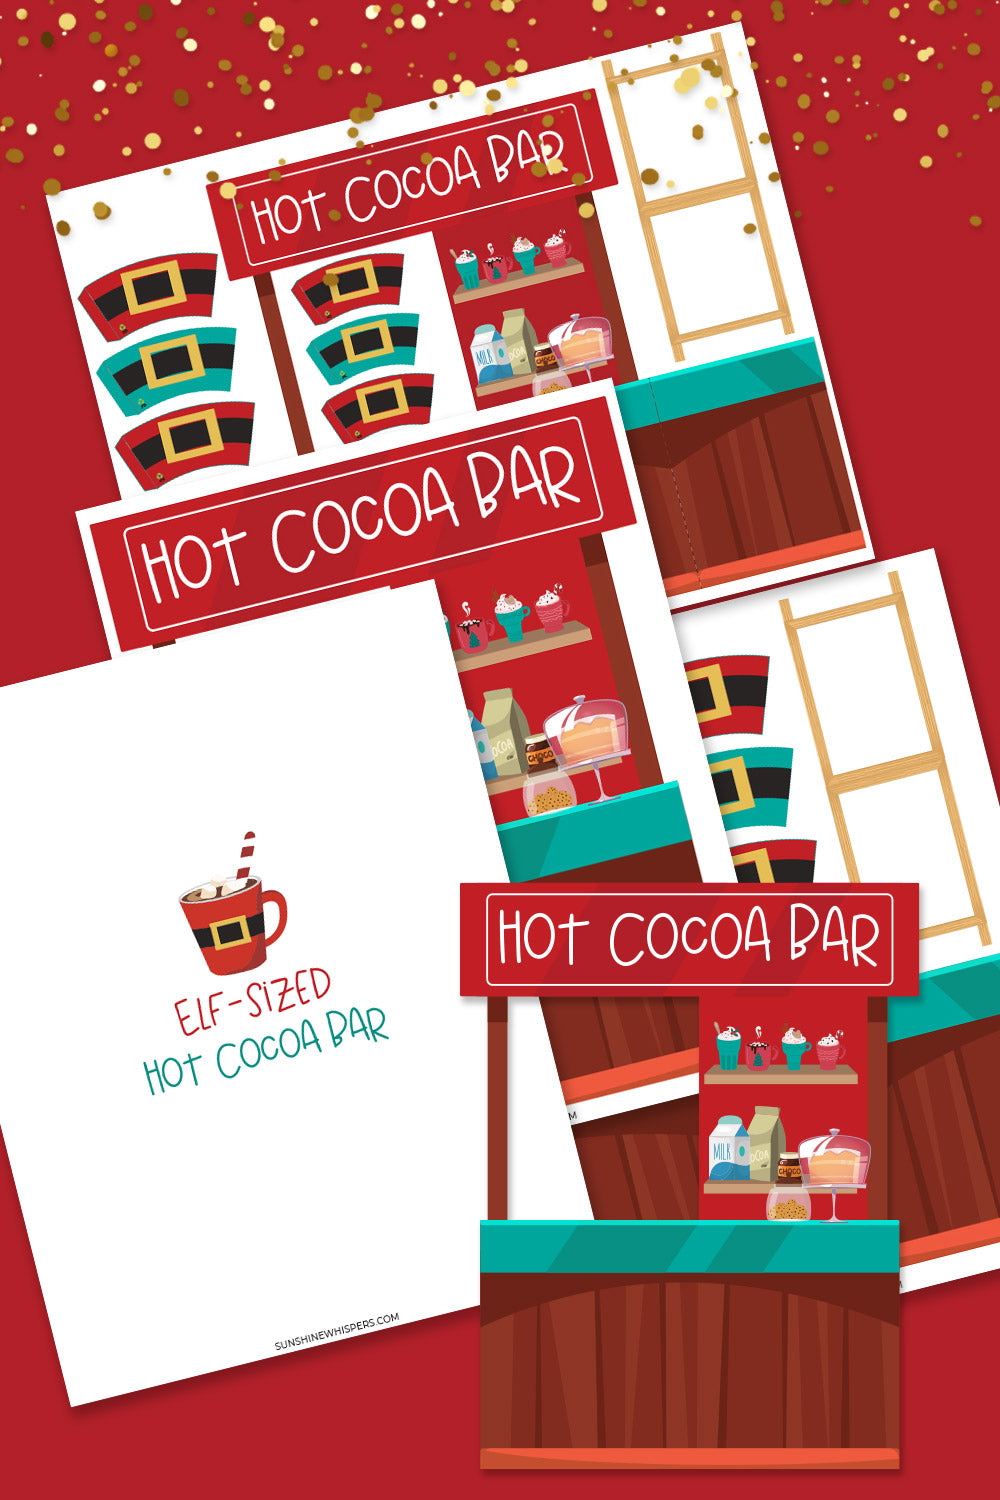 Elf-Sized Hot Cocoa Bar Printable Pack